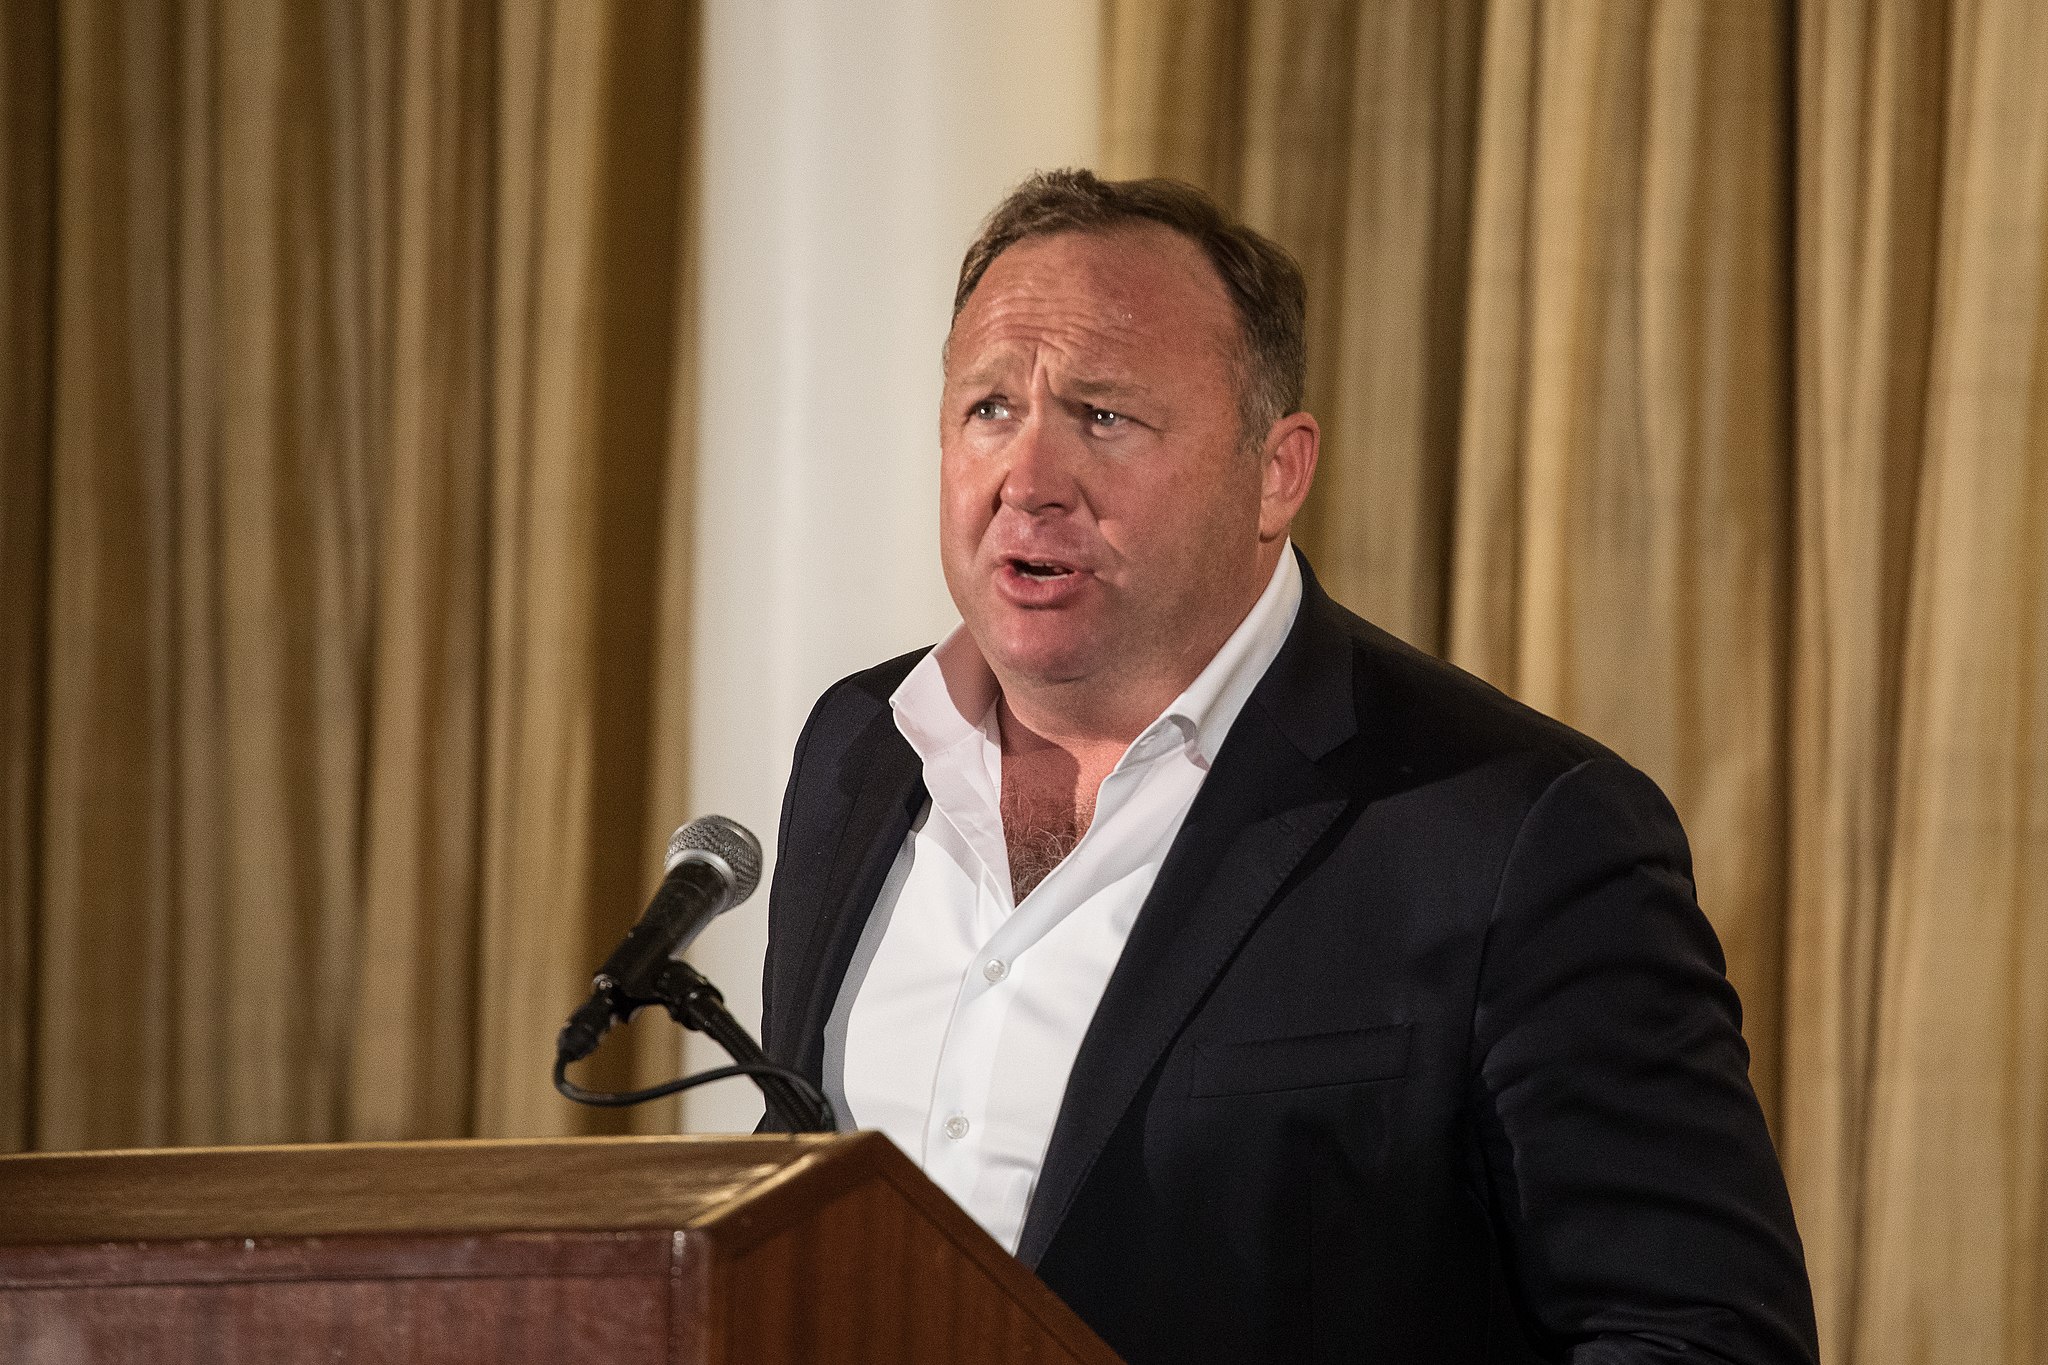 Connecticut judge orders conspiracy theorist Alex Jones to pay $473M in punitive defamation damages for Sandy Hook comments